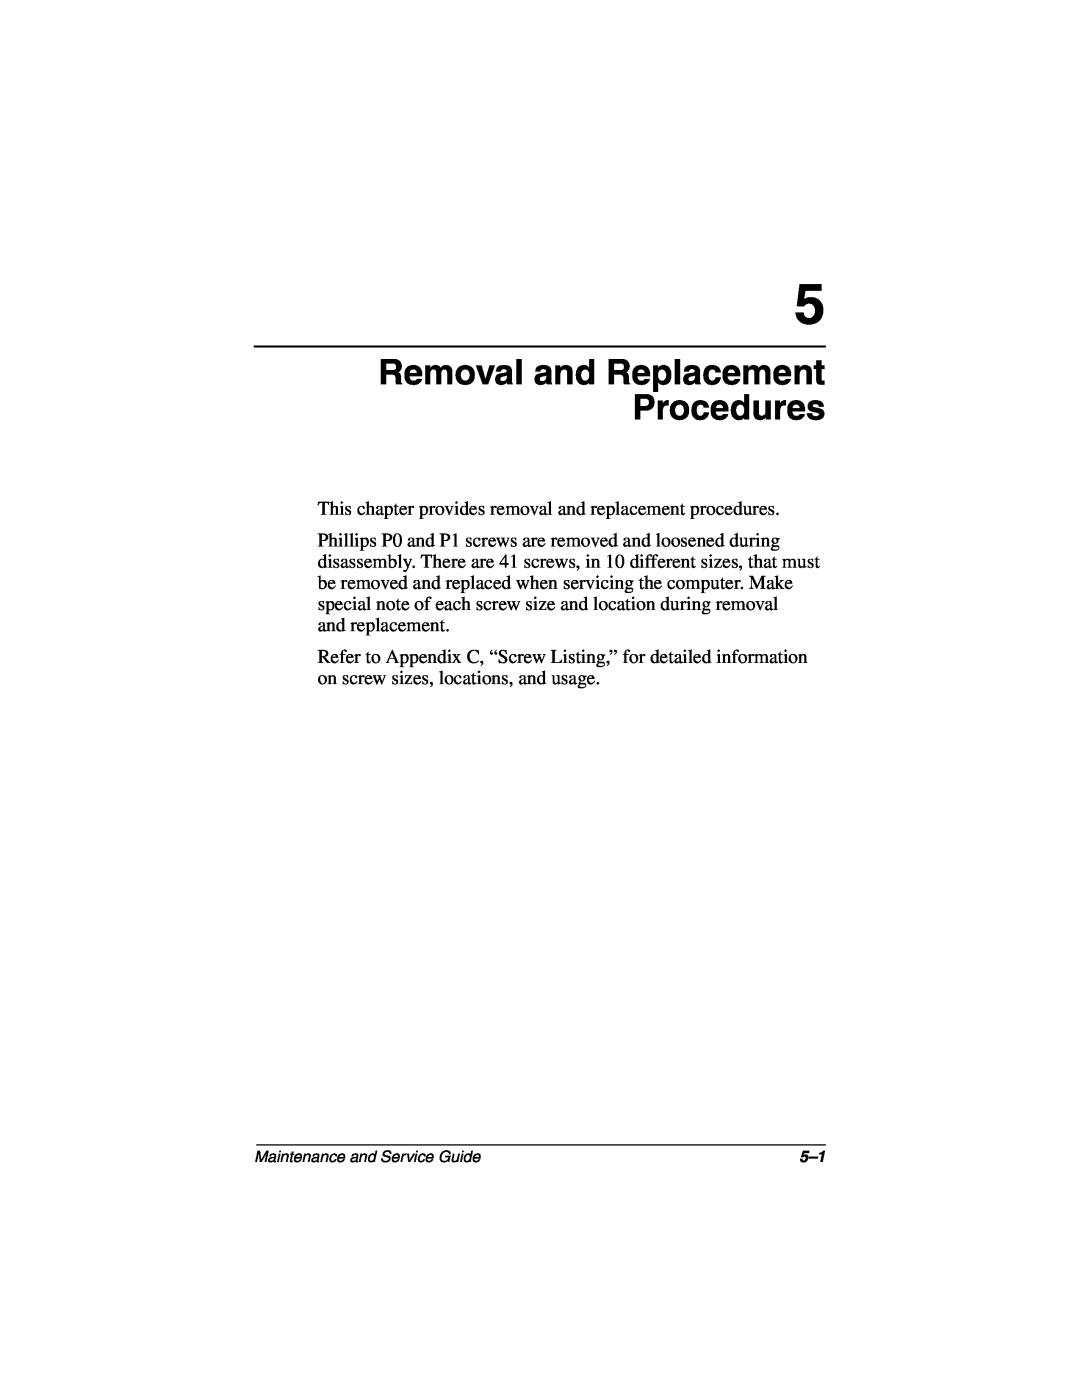 Compaq N160 manual Removal and Replacement Procedures 